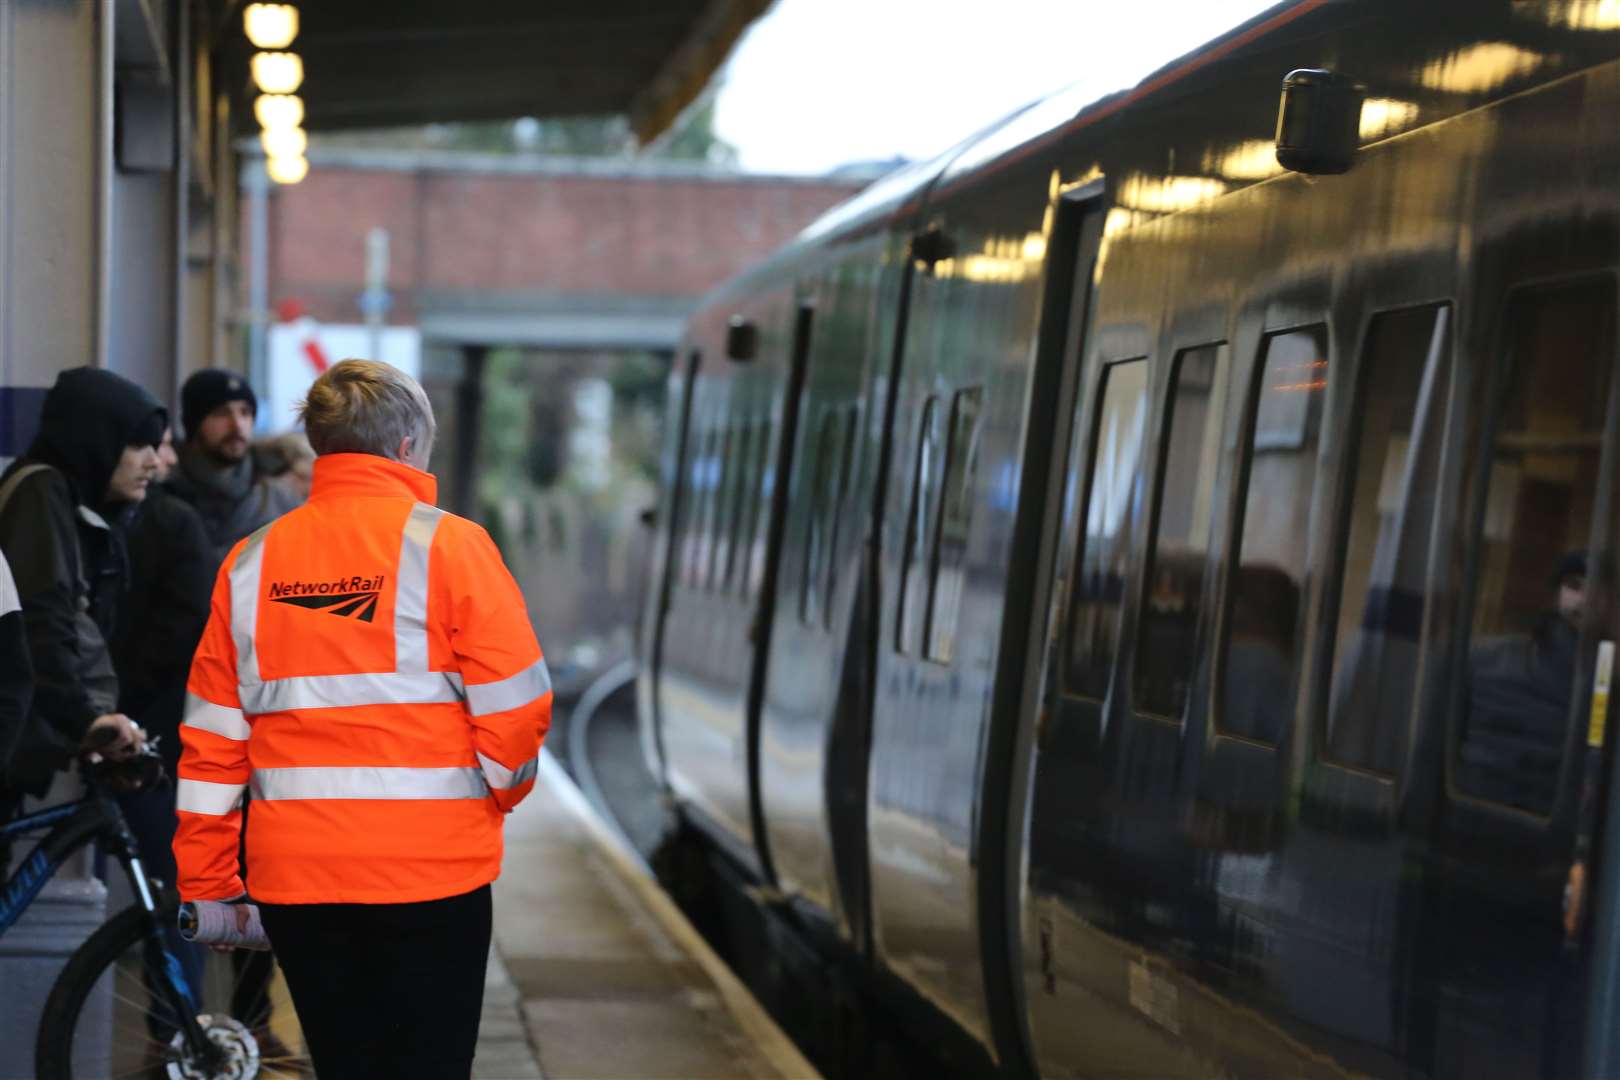 Network Rail wants to retrain former staff to help it continue to run its lines for key workers